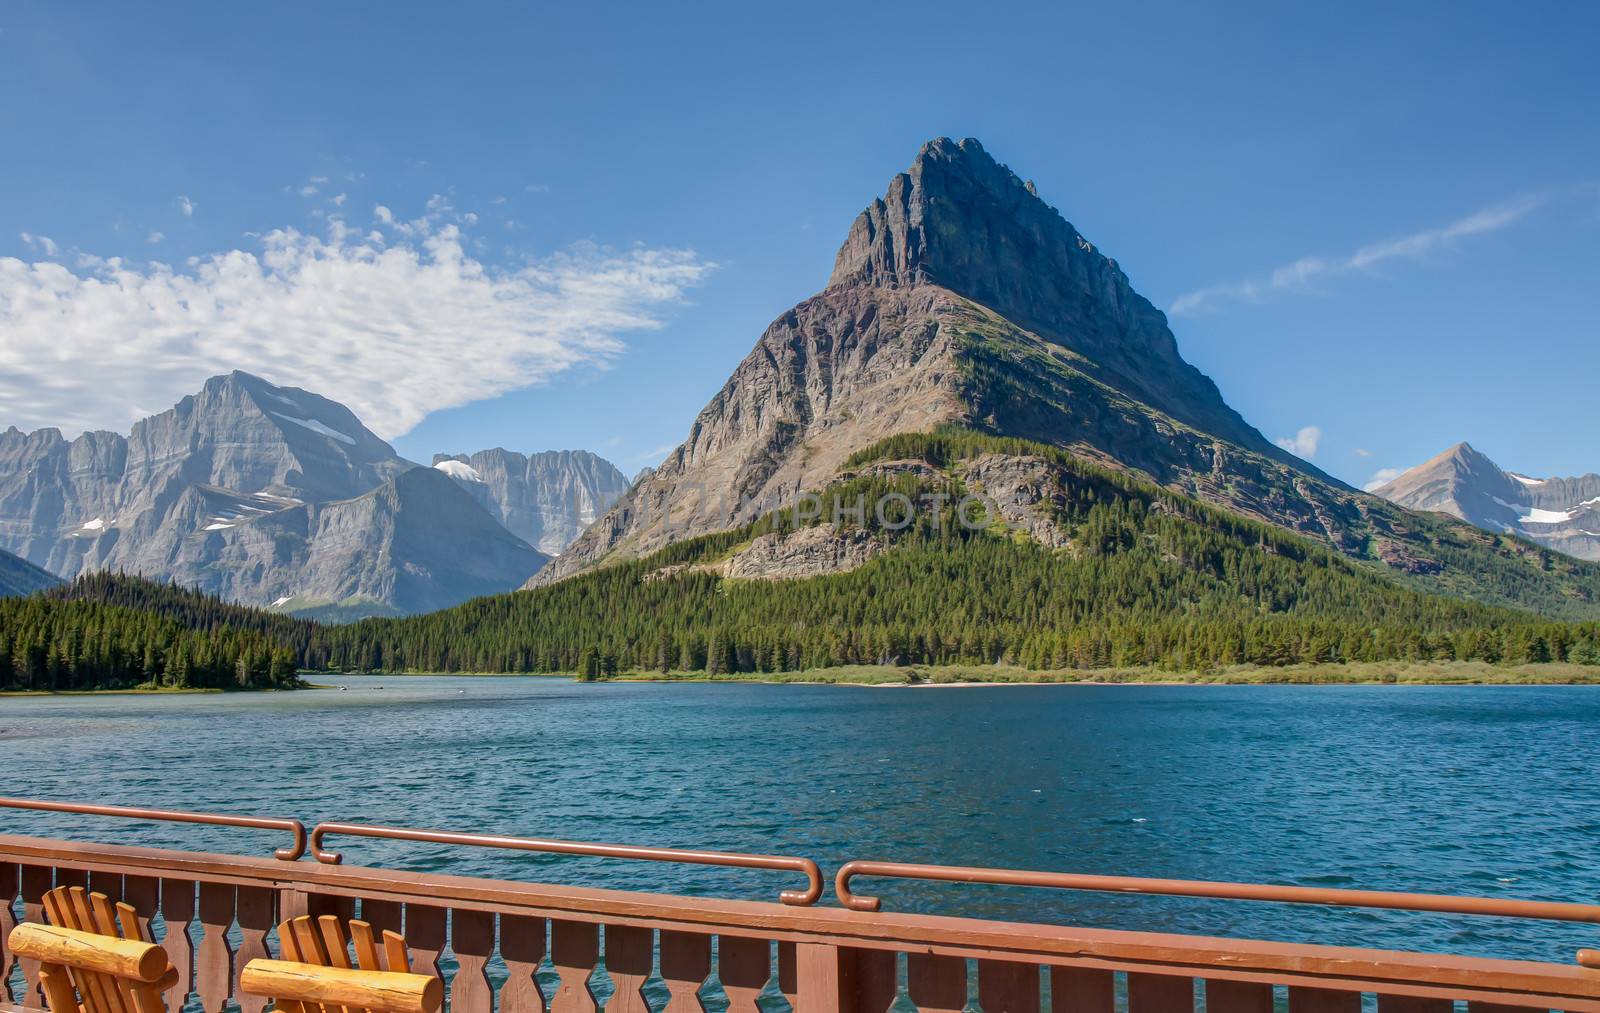 This image is looking directly across the Swiftcurrent Lake at Grinnell Point from the Many Glacier Hotel patio in Glacier National Park.